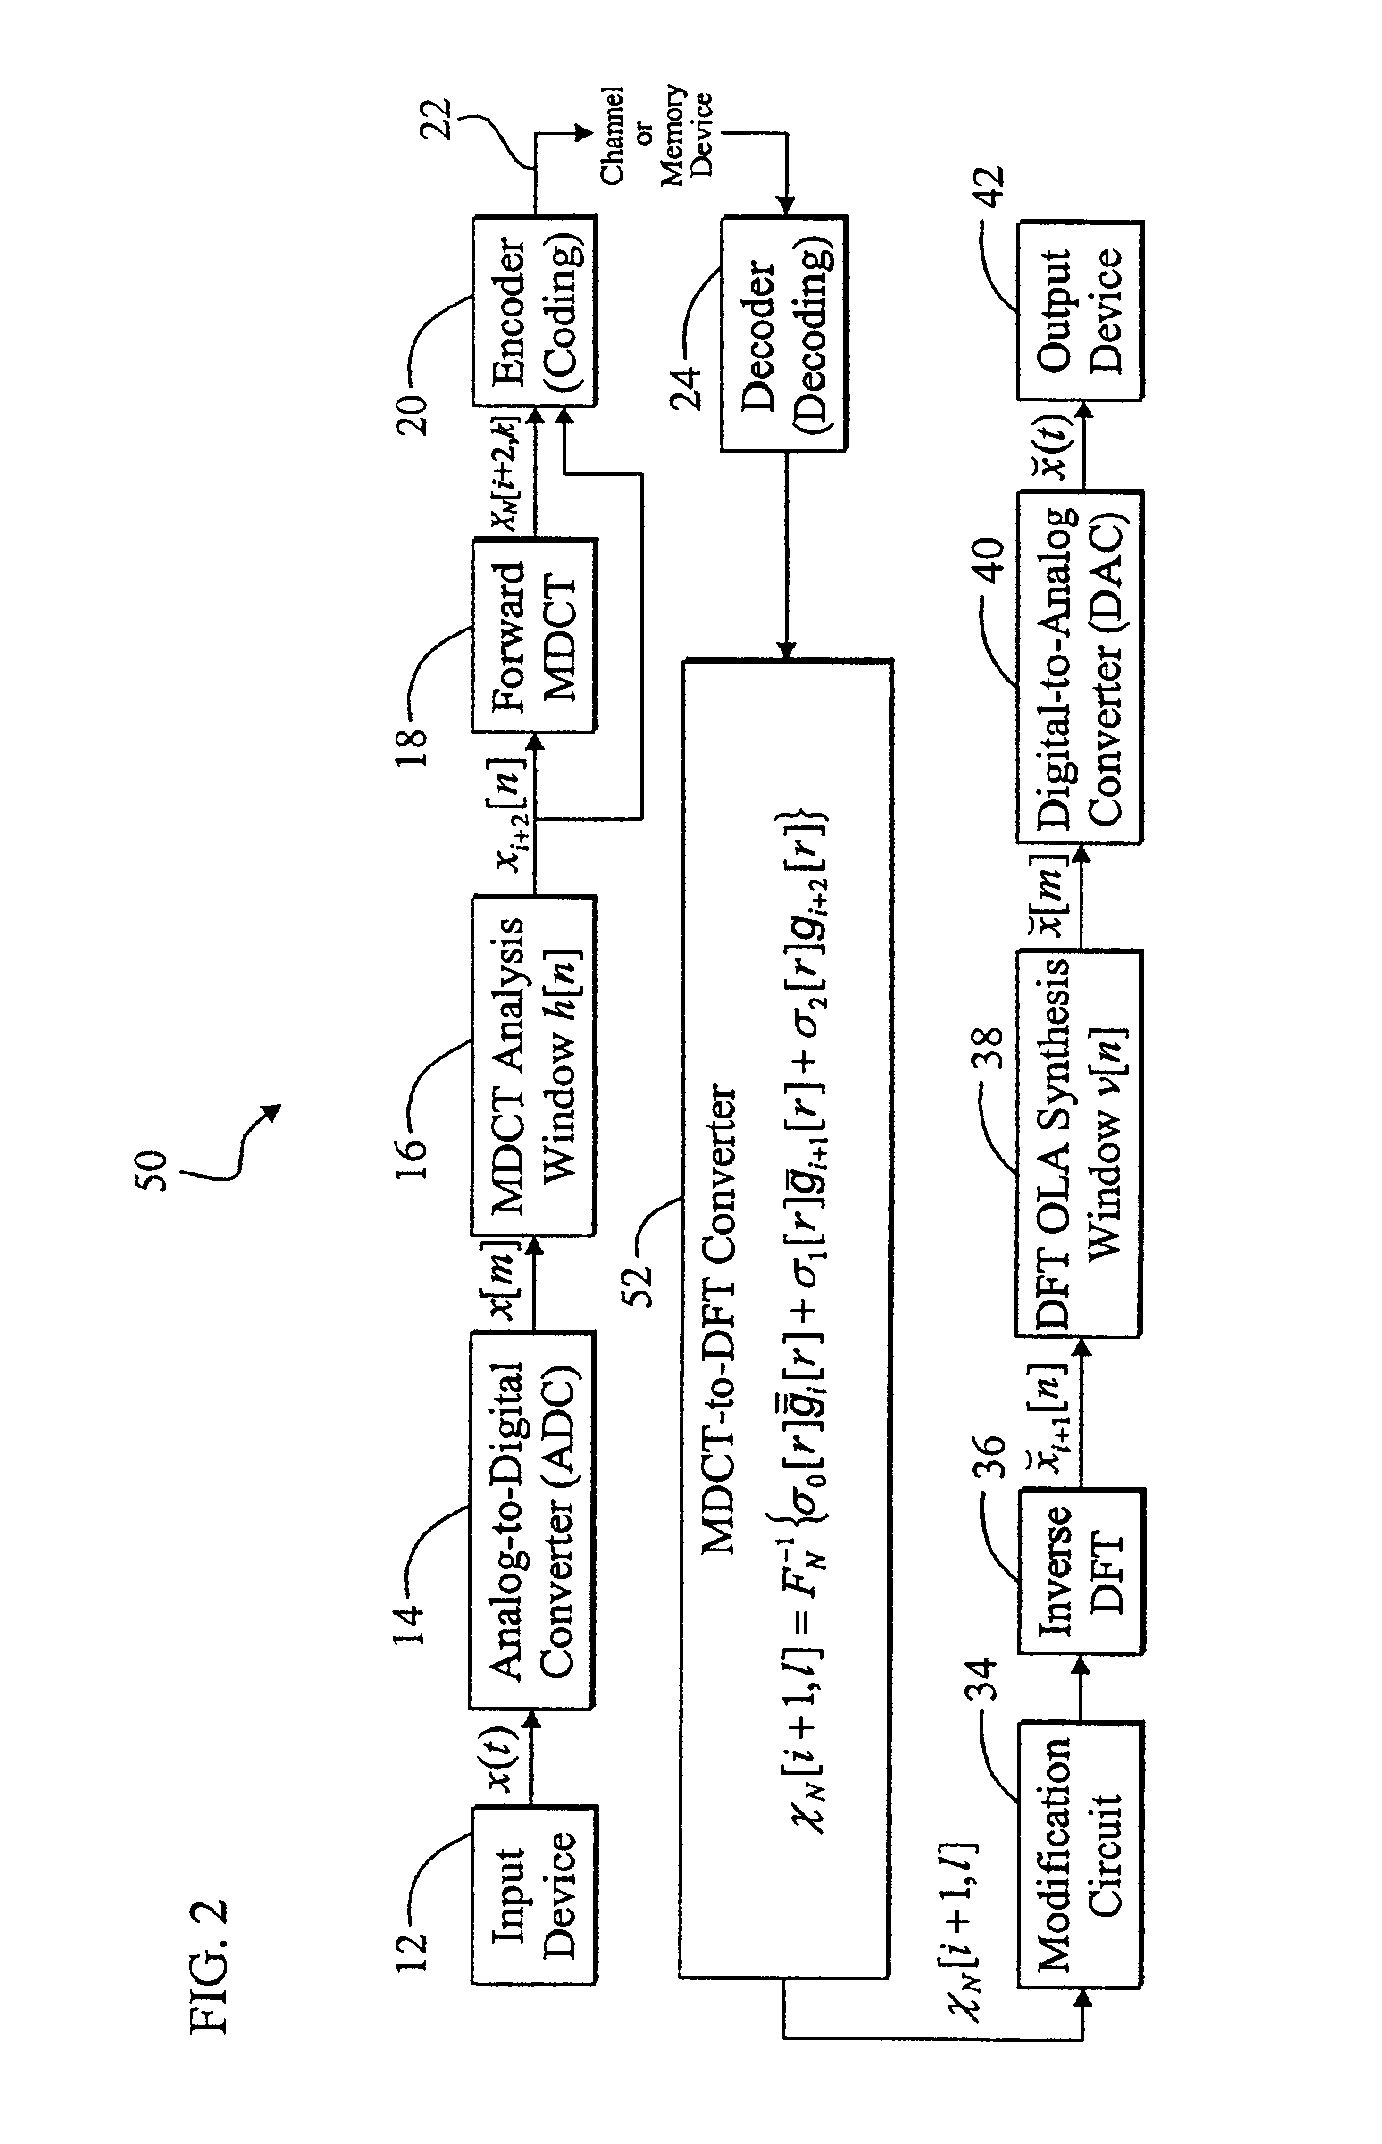 Efficient system and method for converting between different transform-domain signal representations